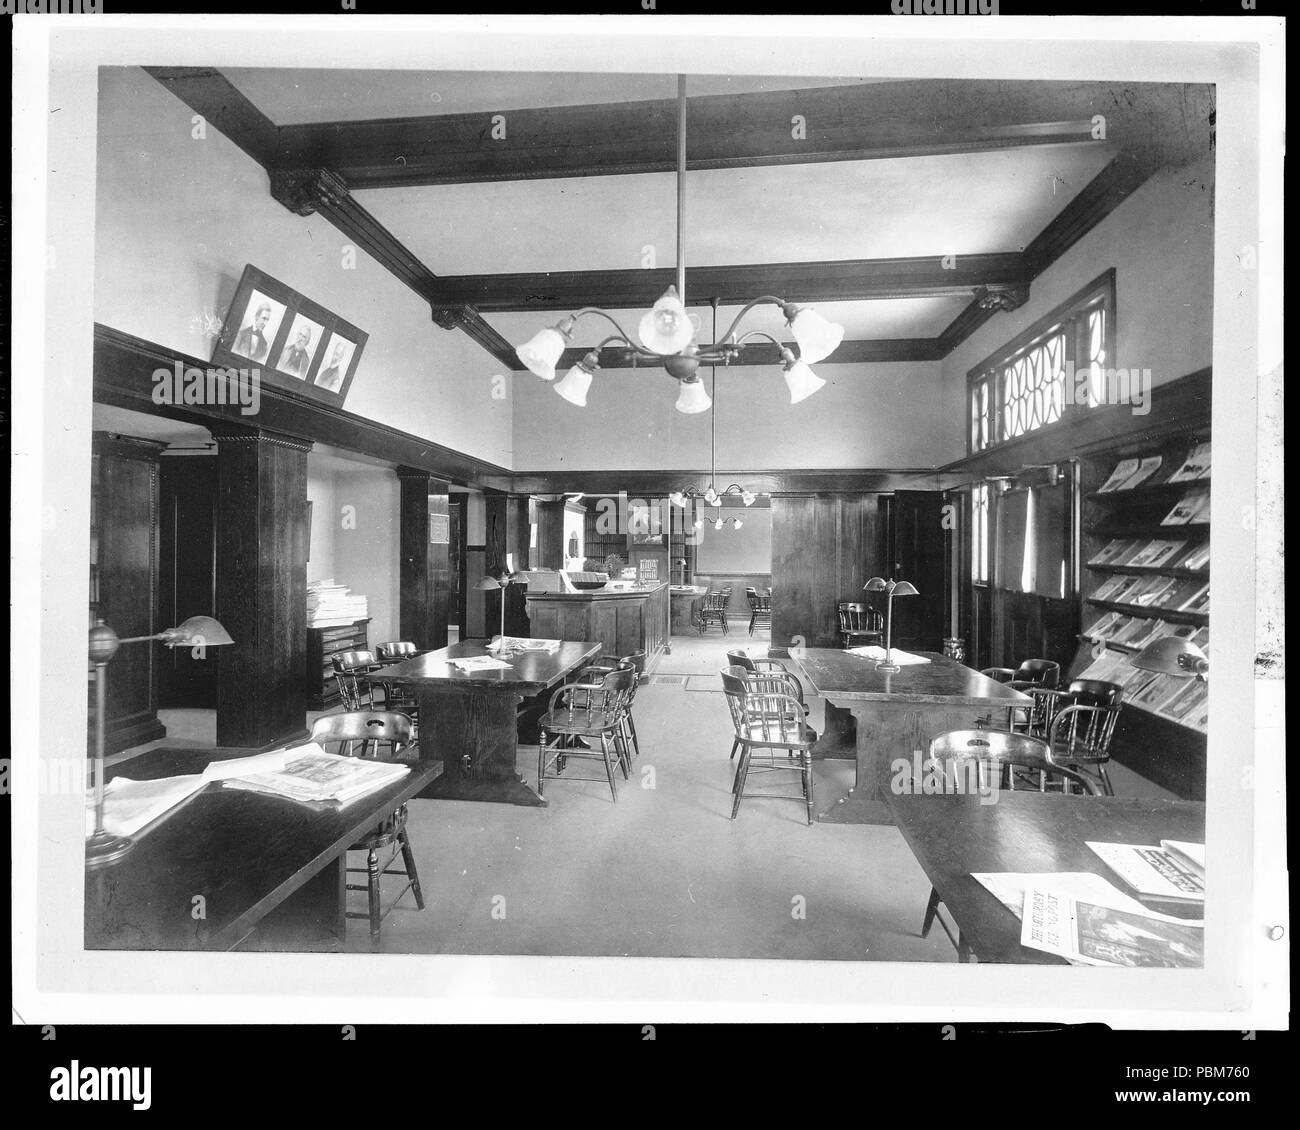 . English: Interior of the Carnegie Public Library in Covina, ca.1908 (1920?) Photograph of the interior of the Carnegie Public Library in Covina, ca.1908 (1920?). Four large wooden tables are arranged in a long rectangular room. A wooden counter is in the back left corner of the room, and a large window is at right. The walls are covered with wooden paneling except on the top third, where they are painted in a light color. There are three portraits hanging on the wall above the paneling at left. Magazine racks line the wall at left, and two chandeliers with six lights each are hanging from th Stock Photo